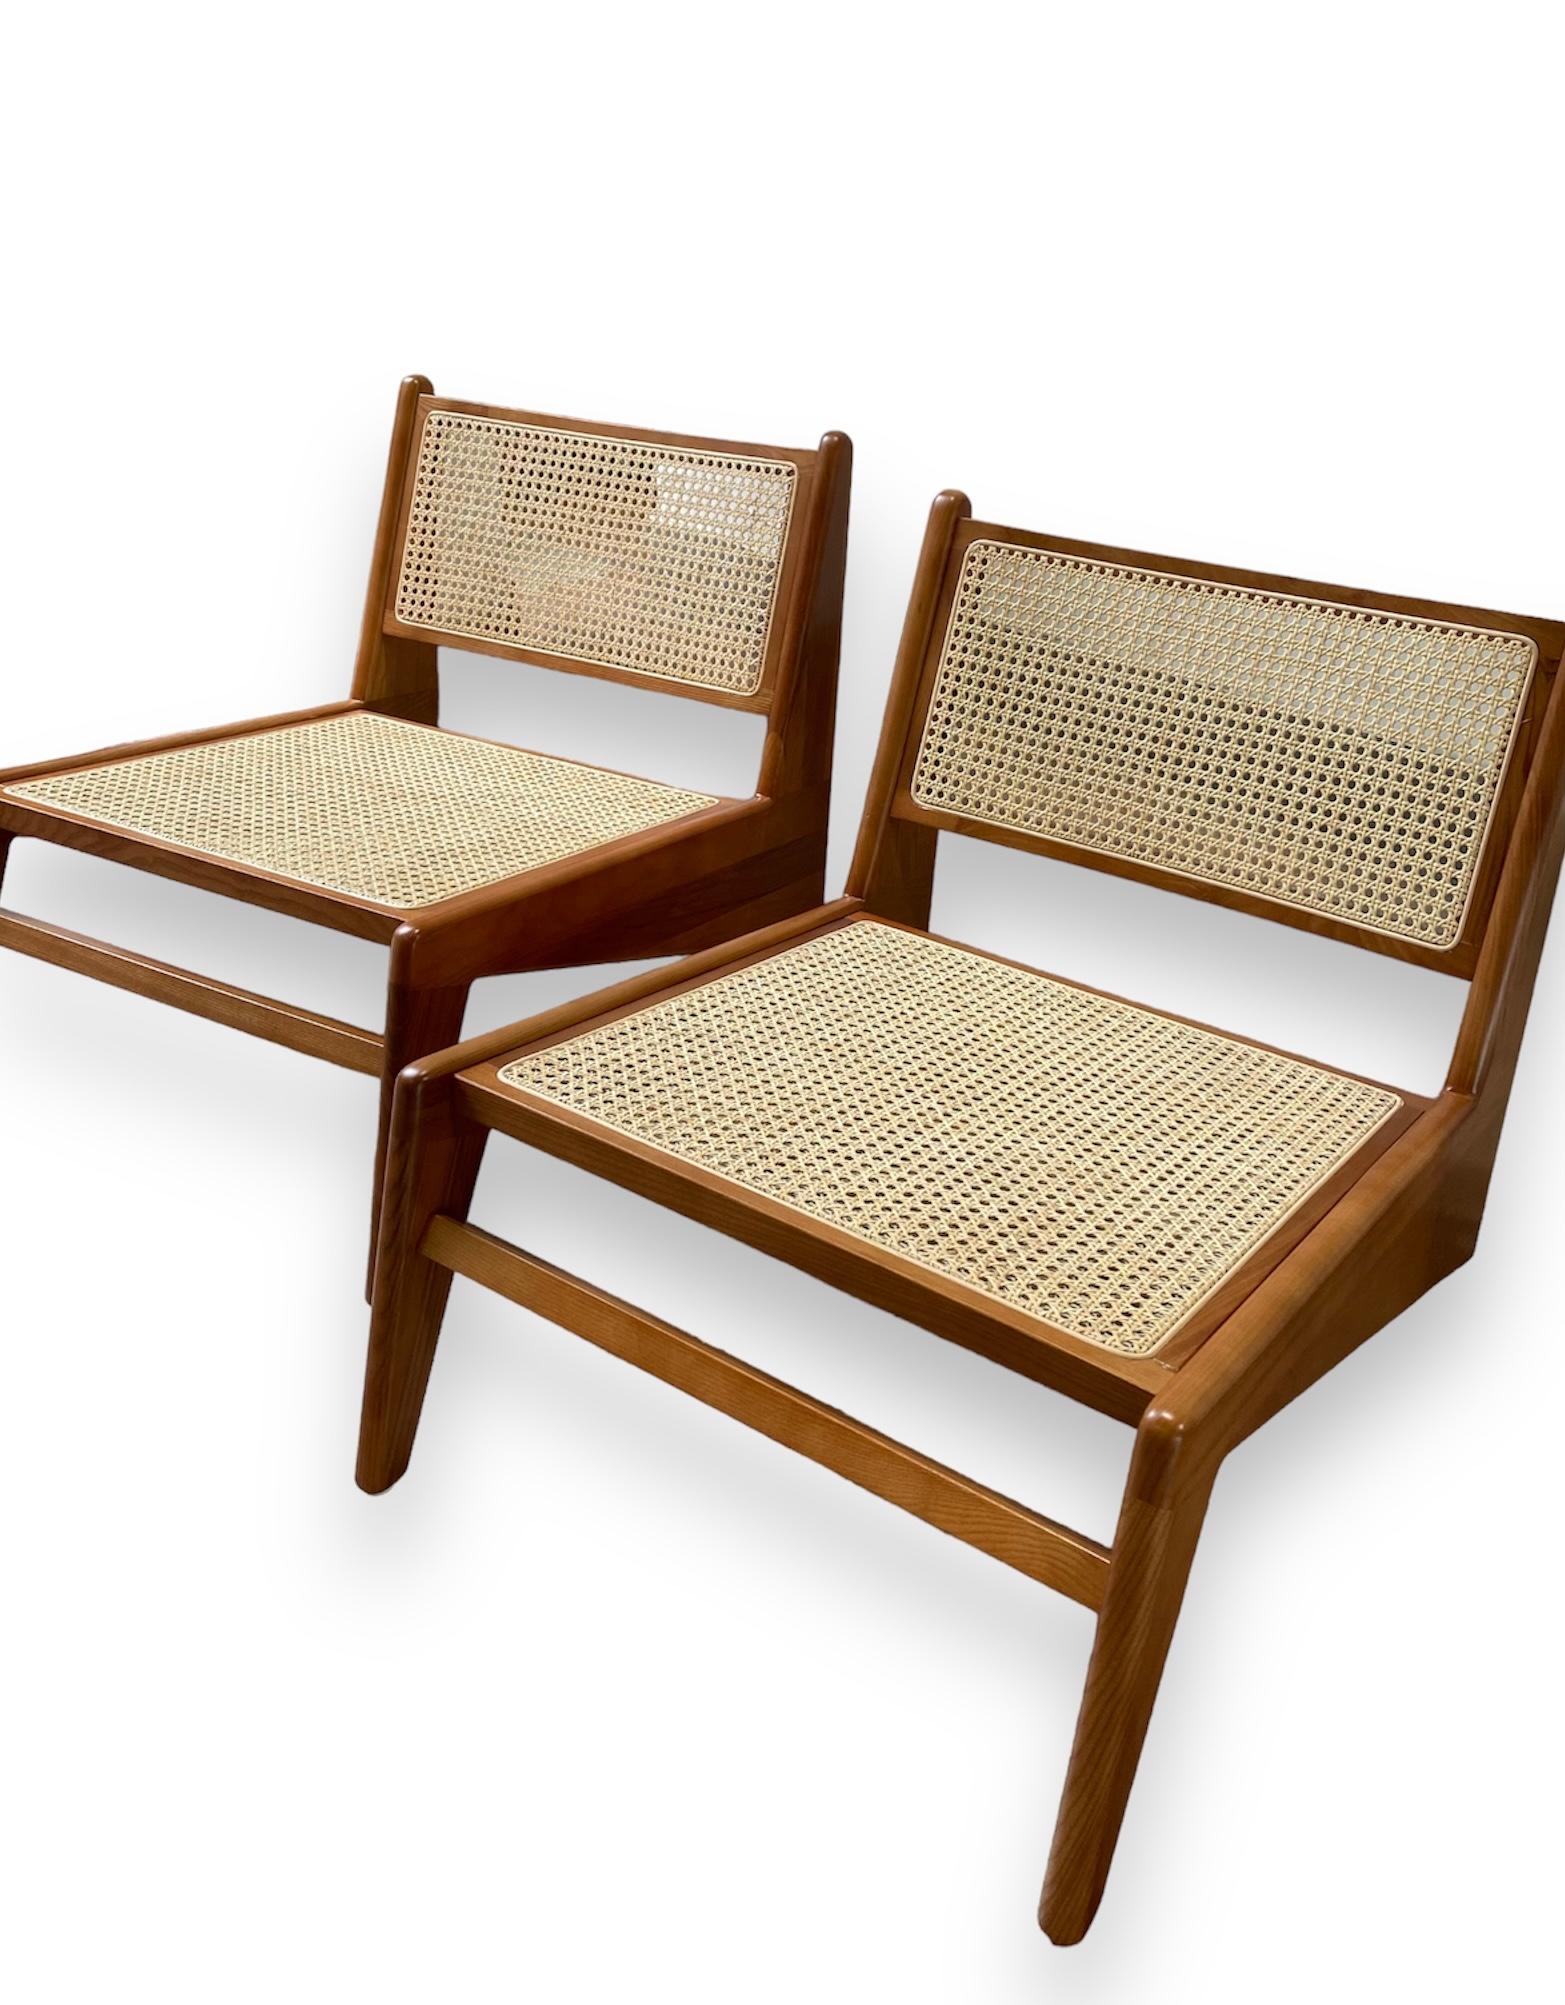 Pair of Armchairs in the Style of P. Jeanneret Design, 1950 For Sale 4